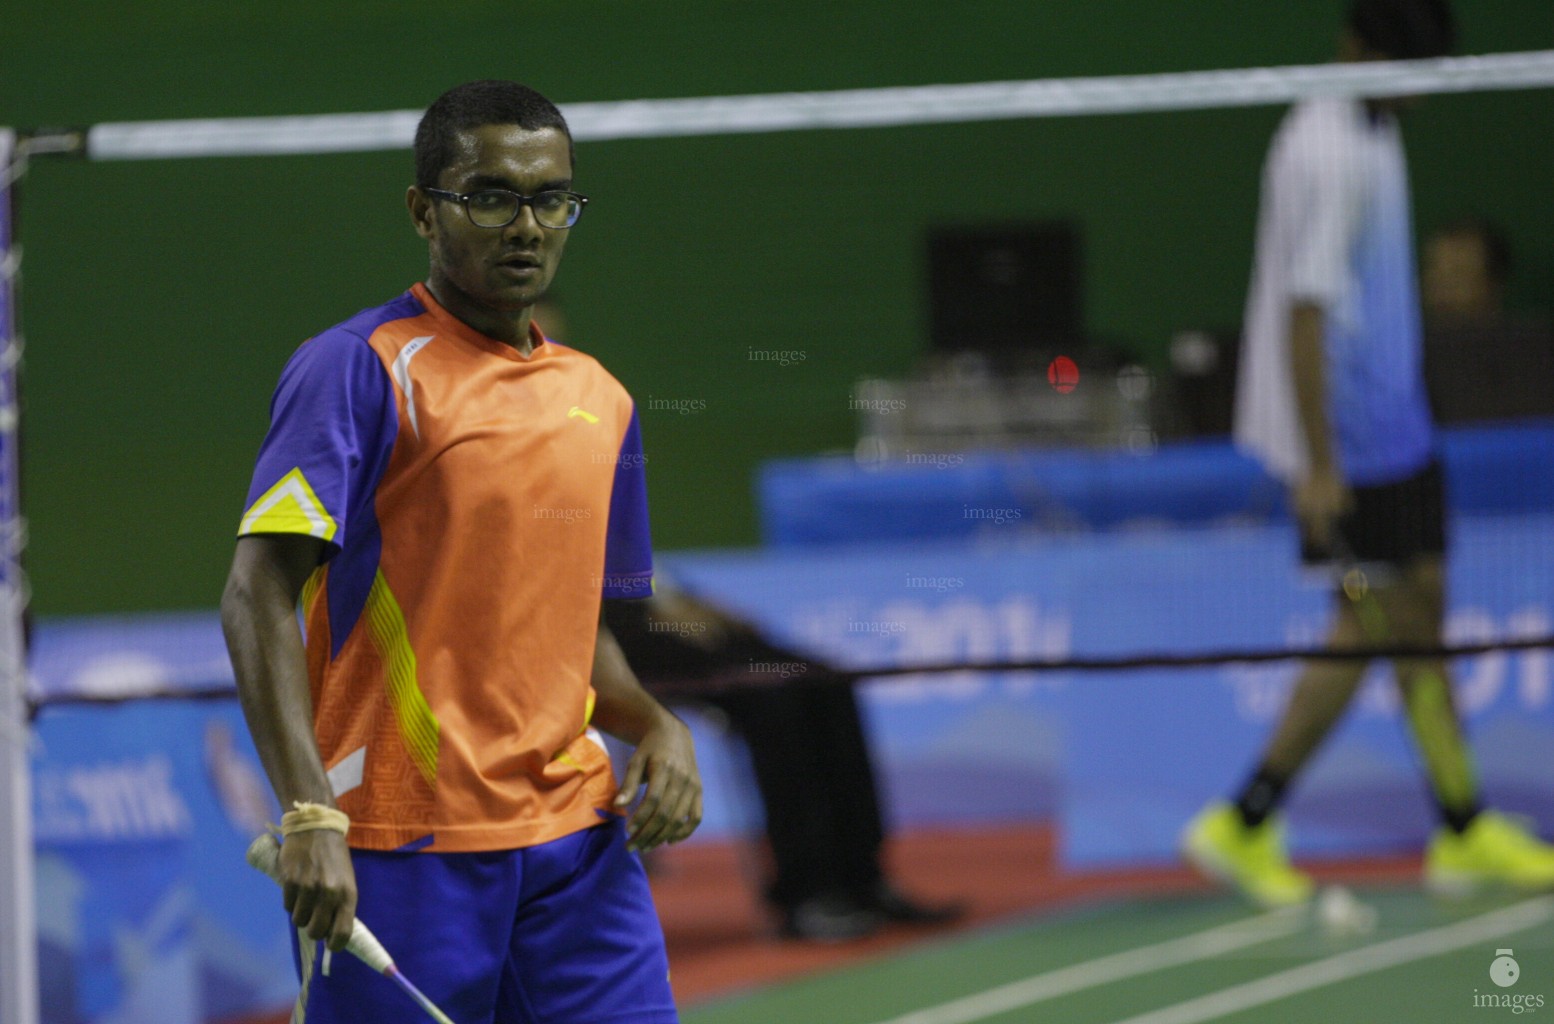 Day 3 of Maldives Badminton matches in the South Asian Games in Shillong, India 2016 (Images.mv Photo: Mohamed Ahsan)